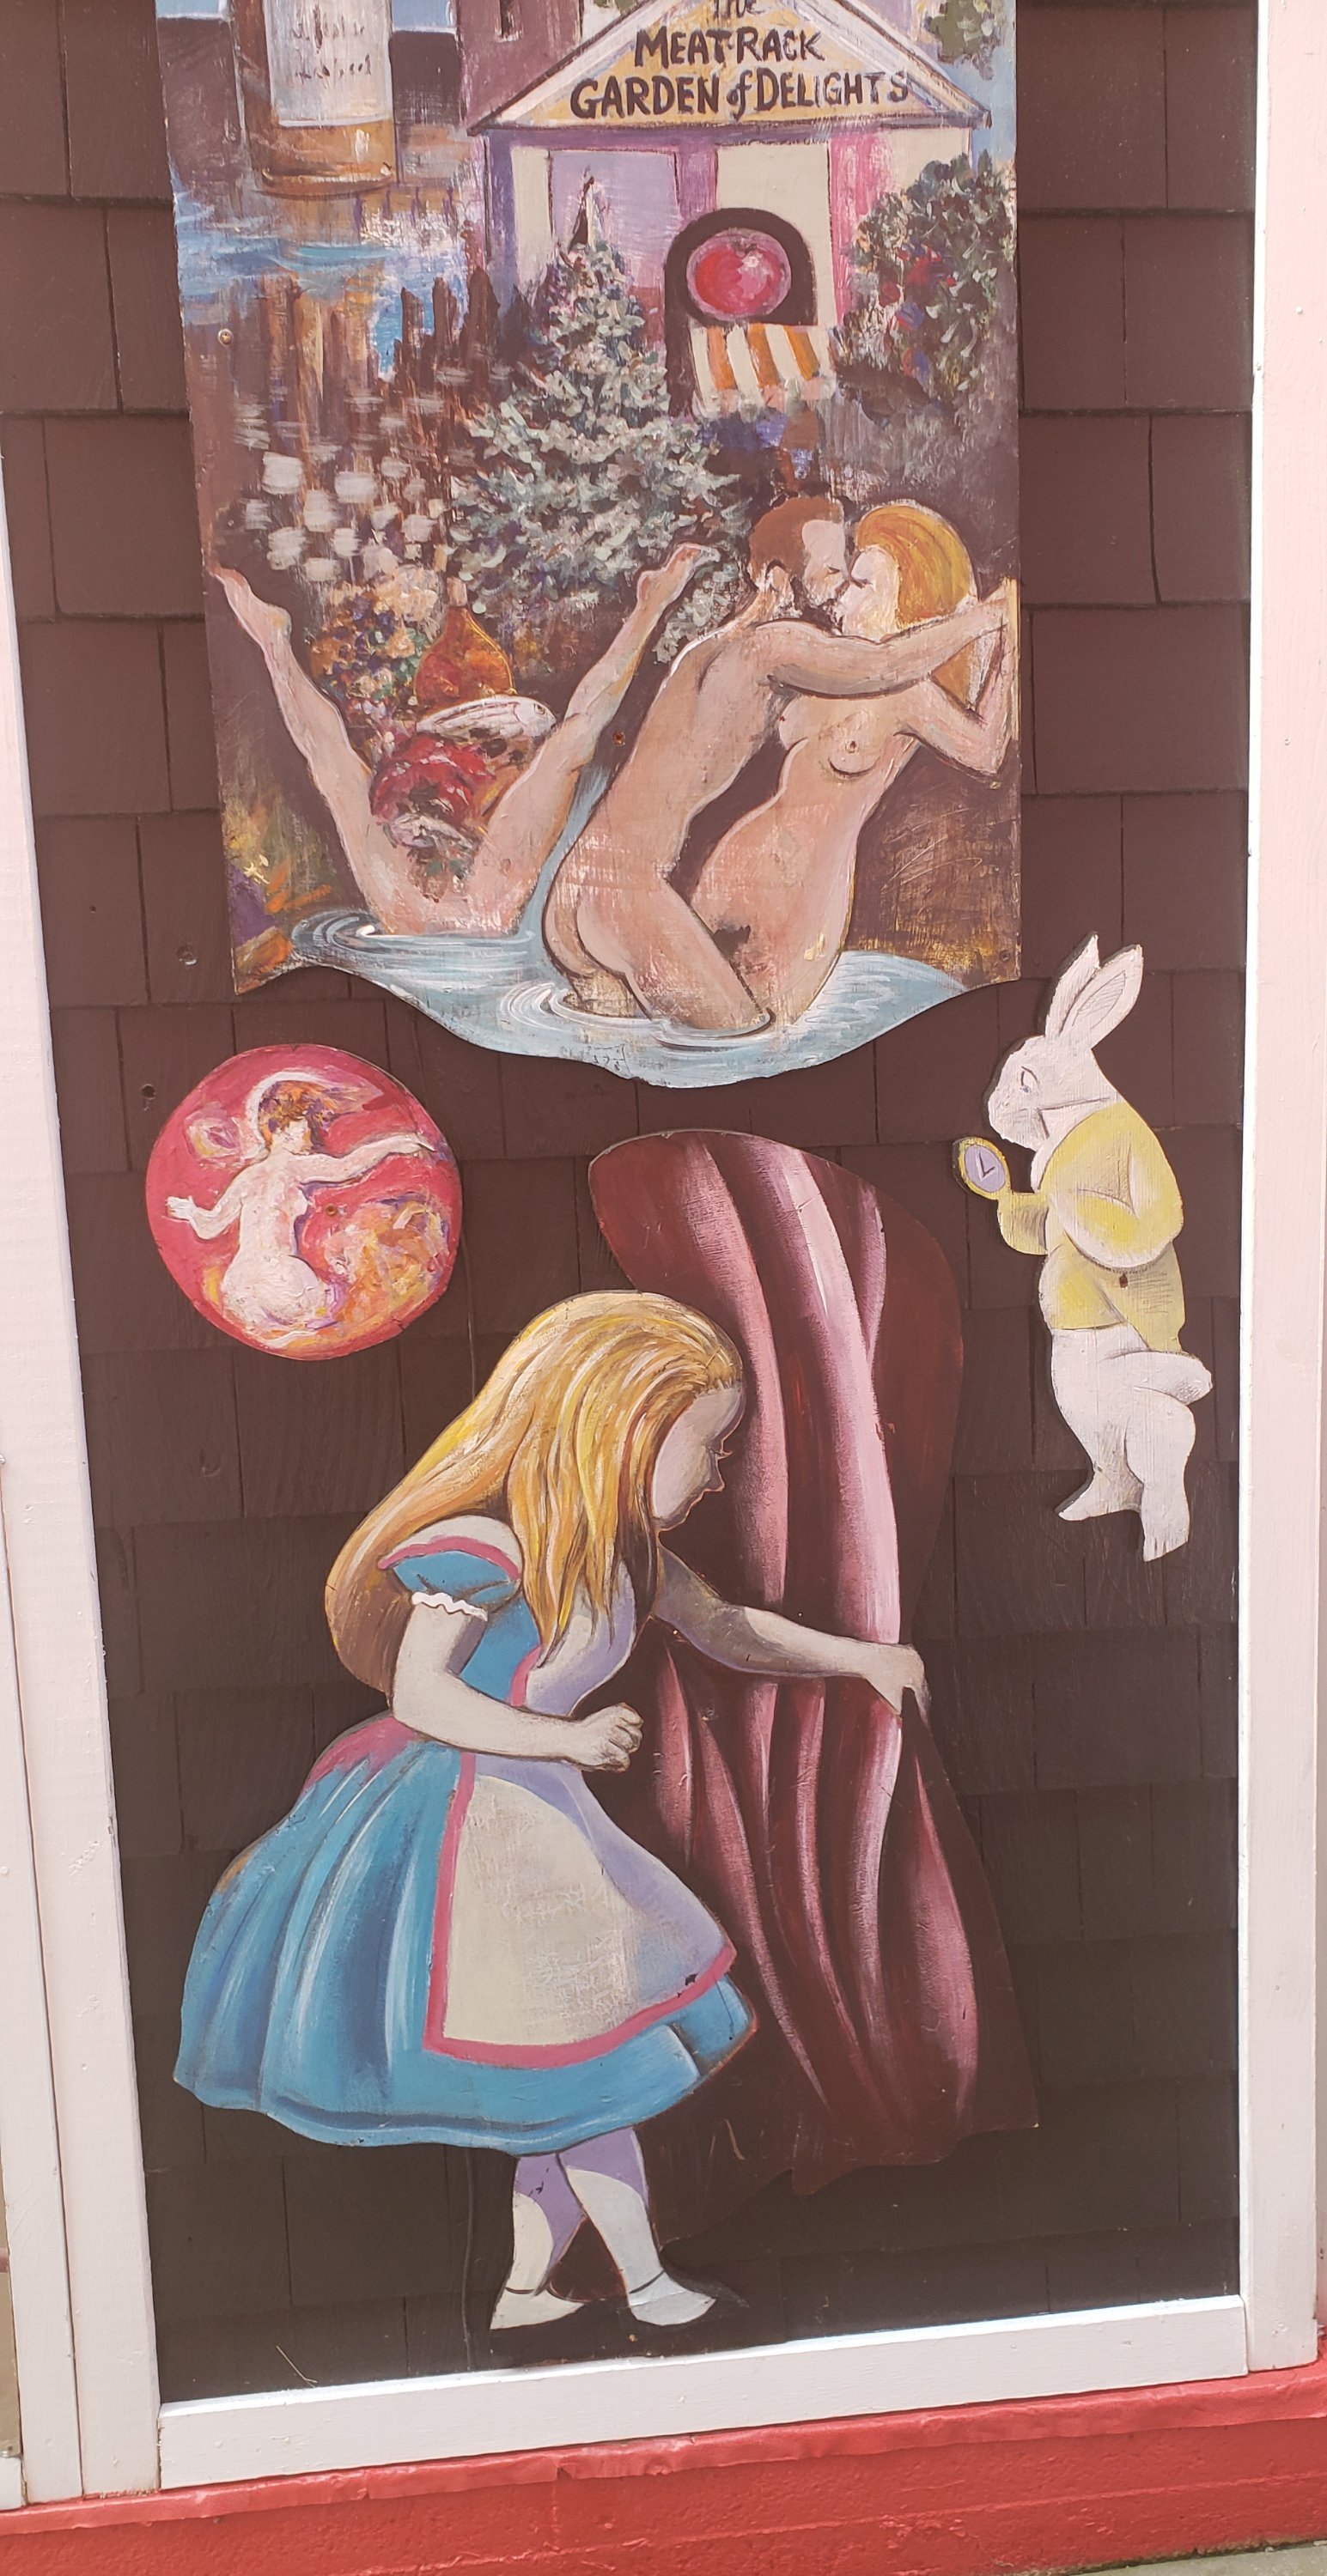 Art seen in an alley in Provincetown. Alice in Wonderland, and a few unrelated explicit offerings